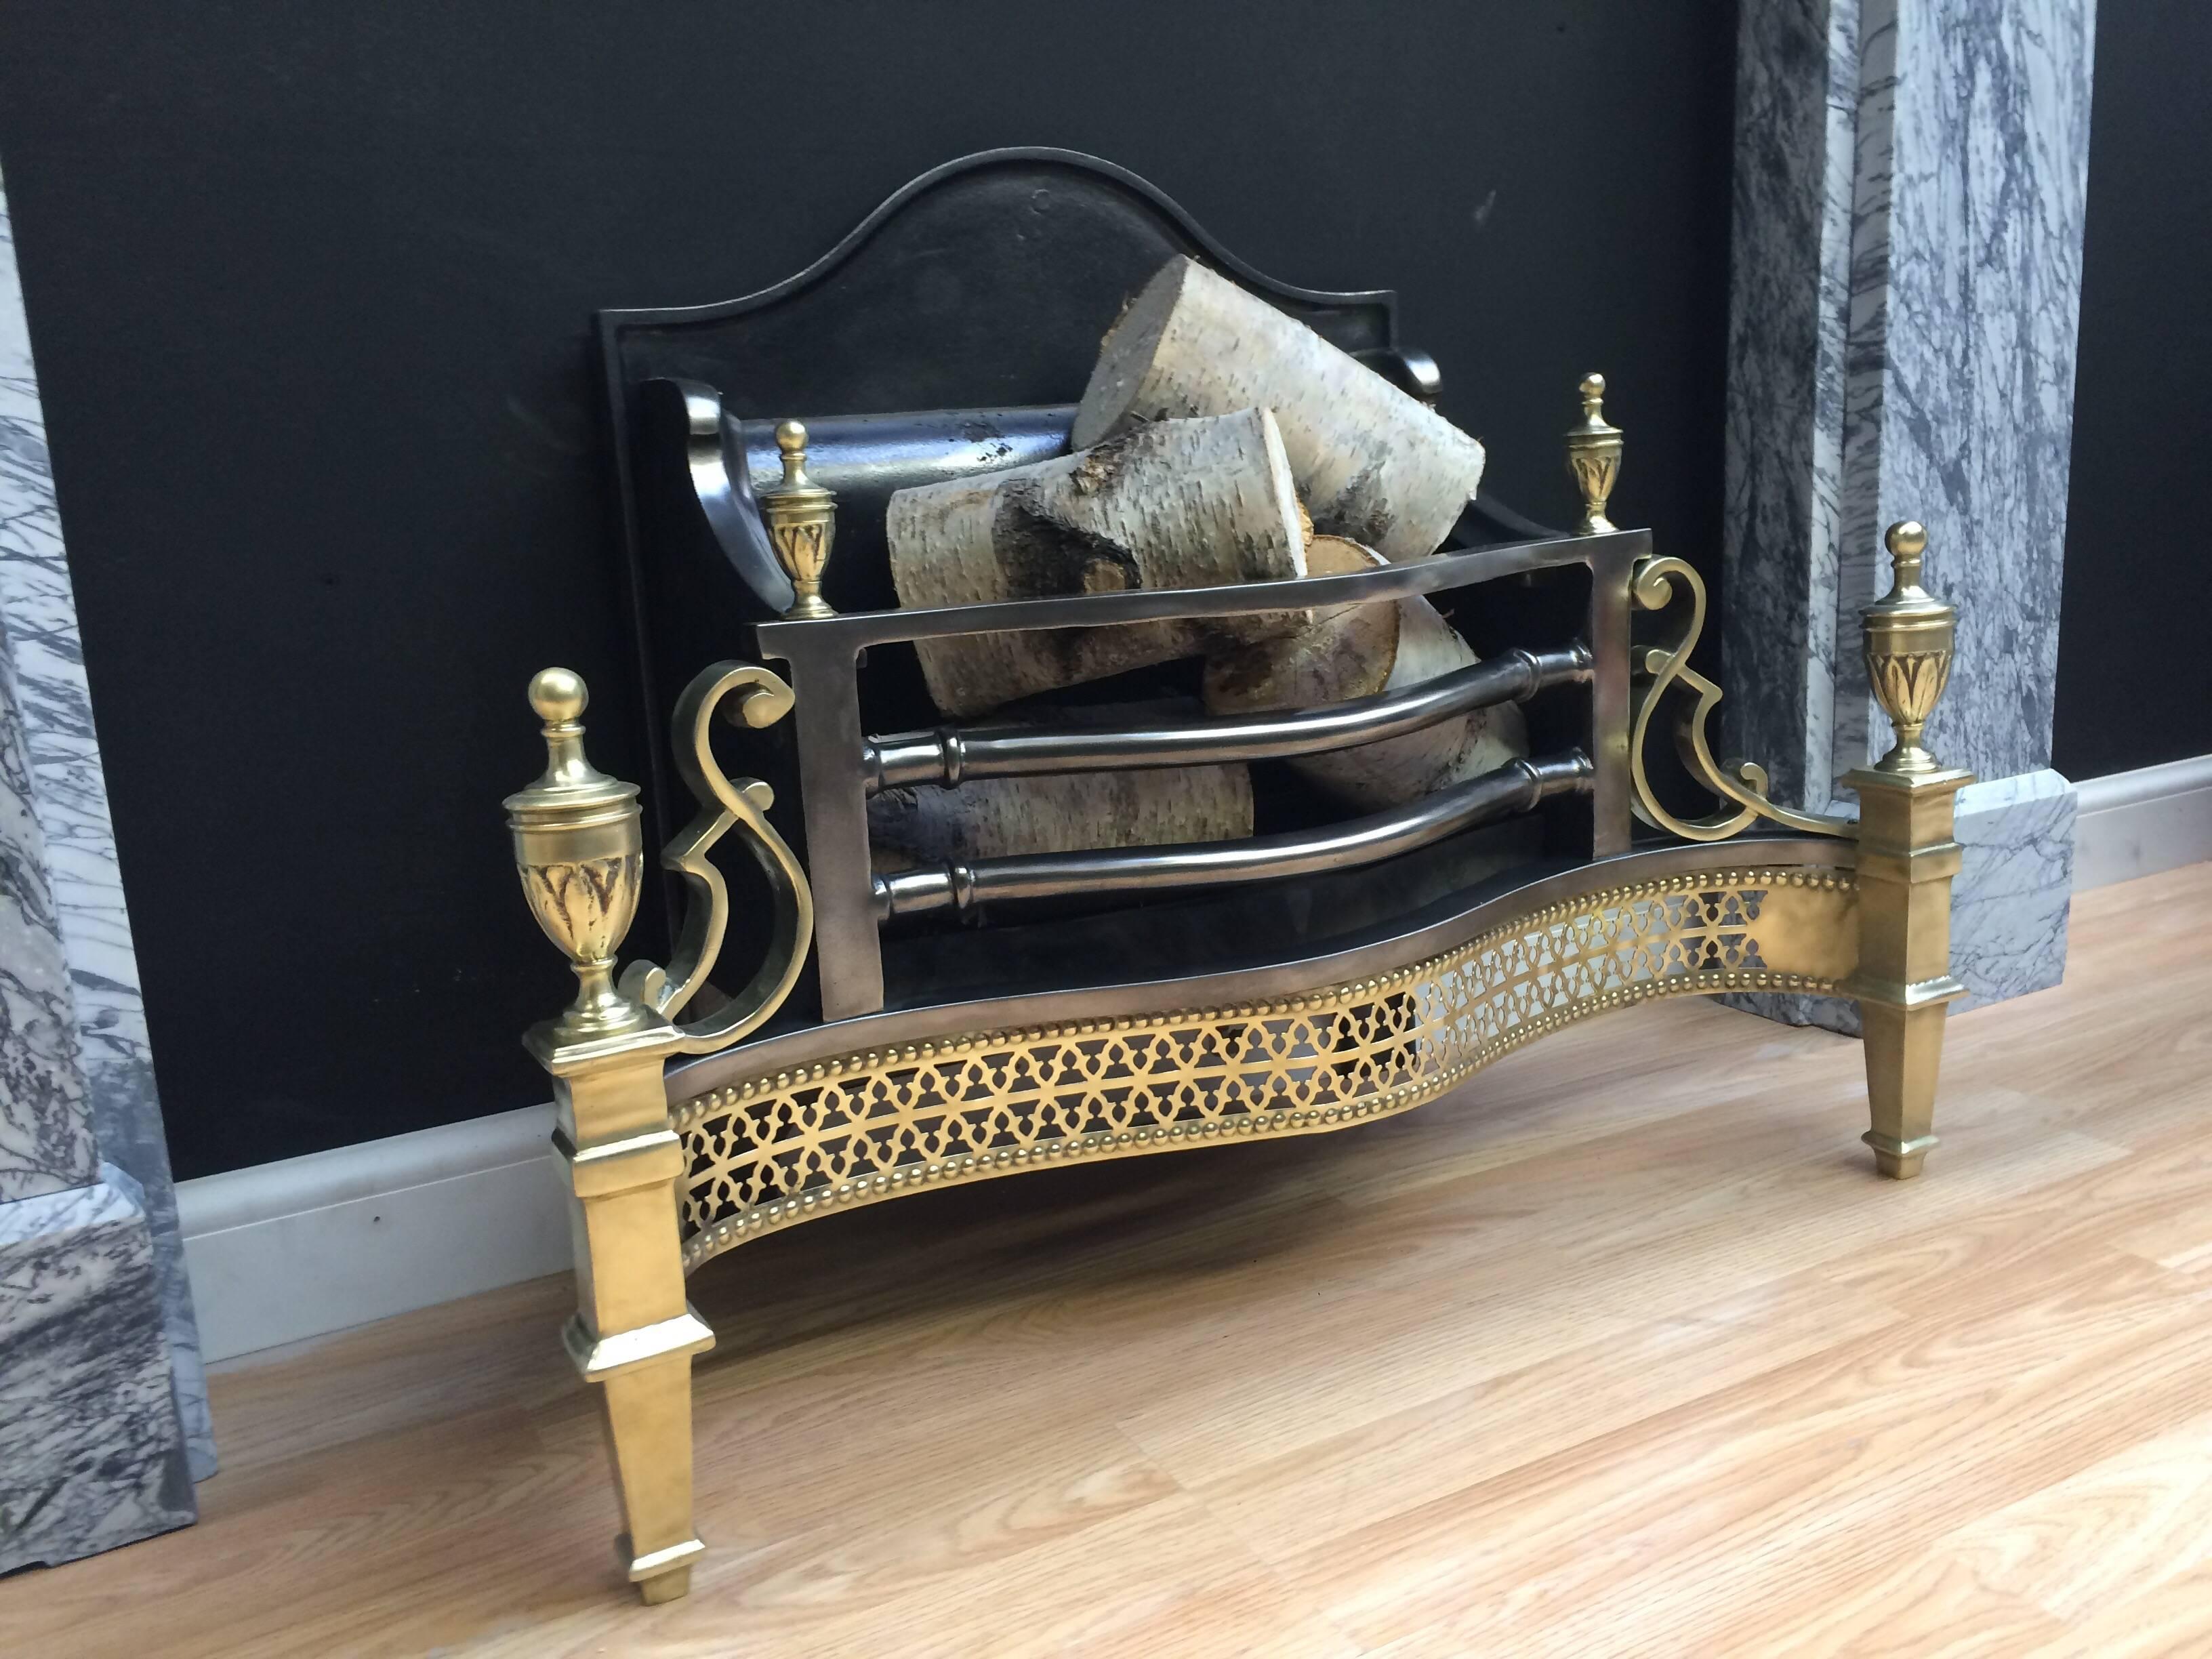 English Antique Reproduction Brass Fire Basket